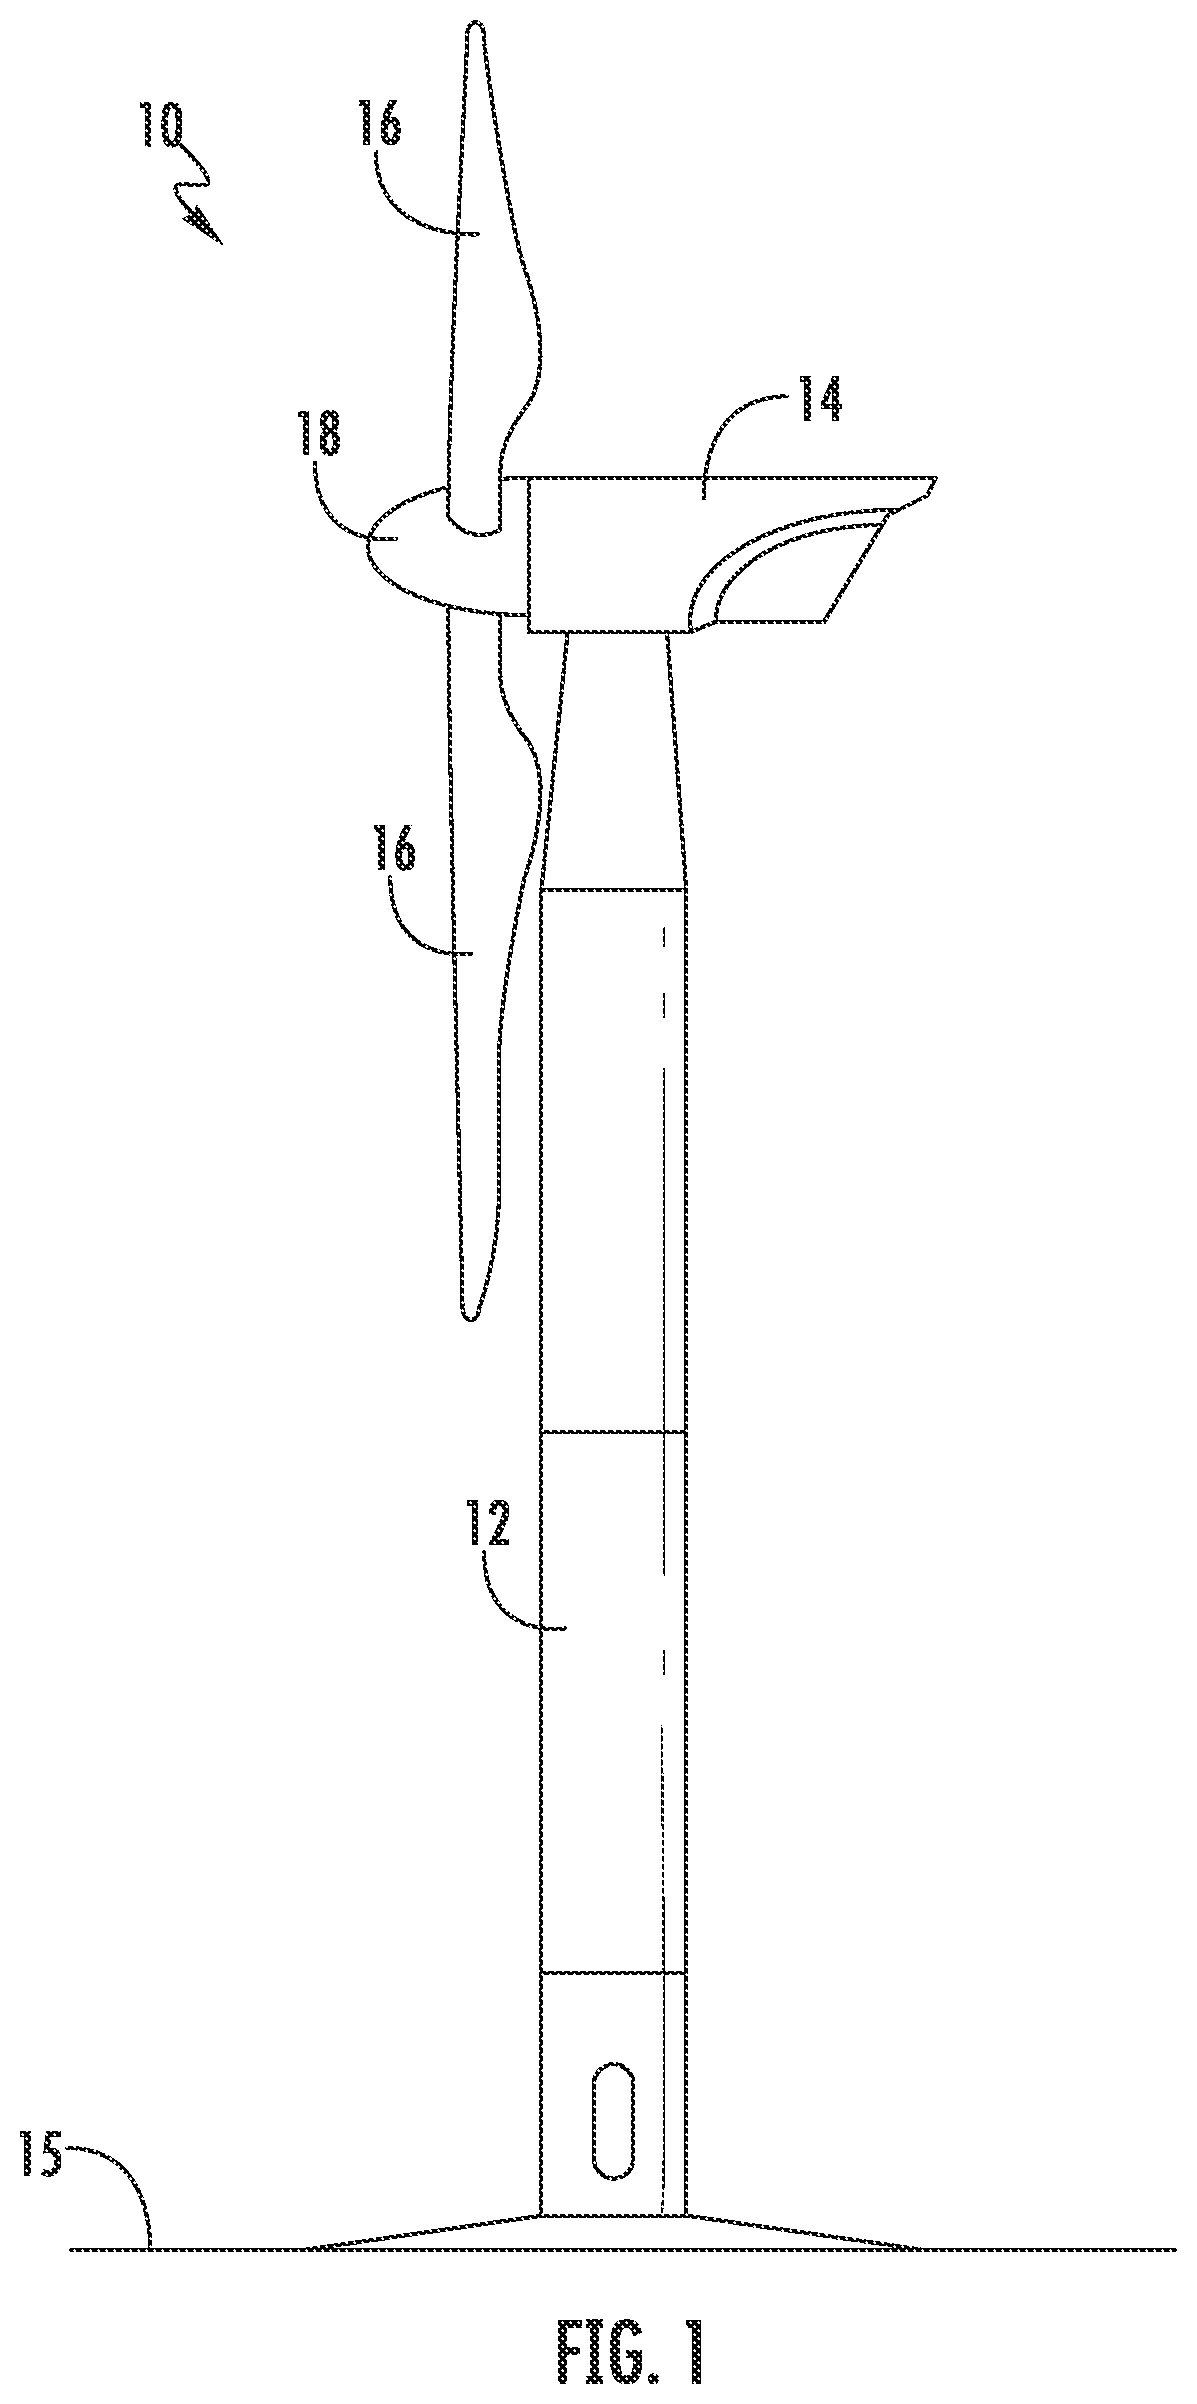 Method for manufacturing wind turbine tower structure for preventing vortex shedding